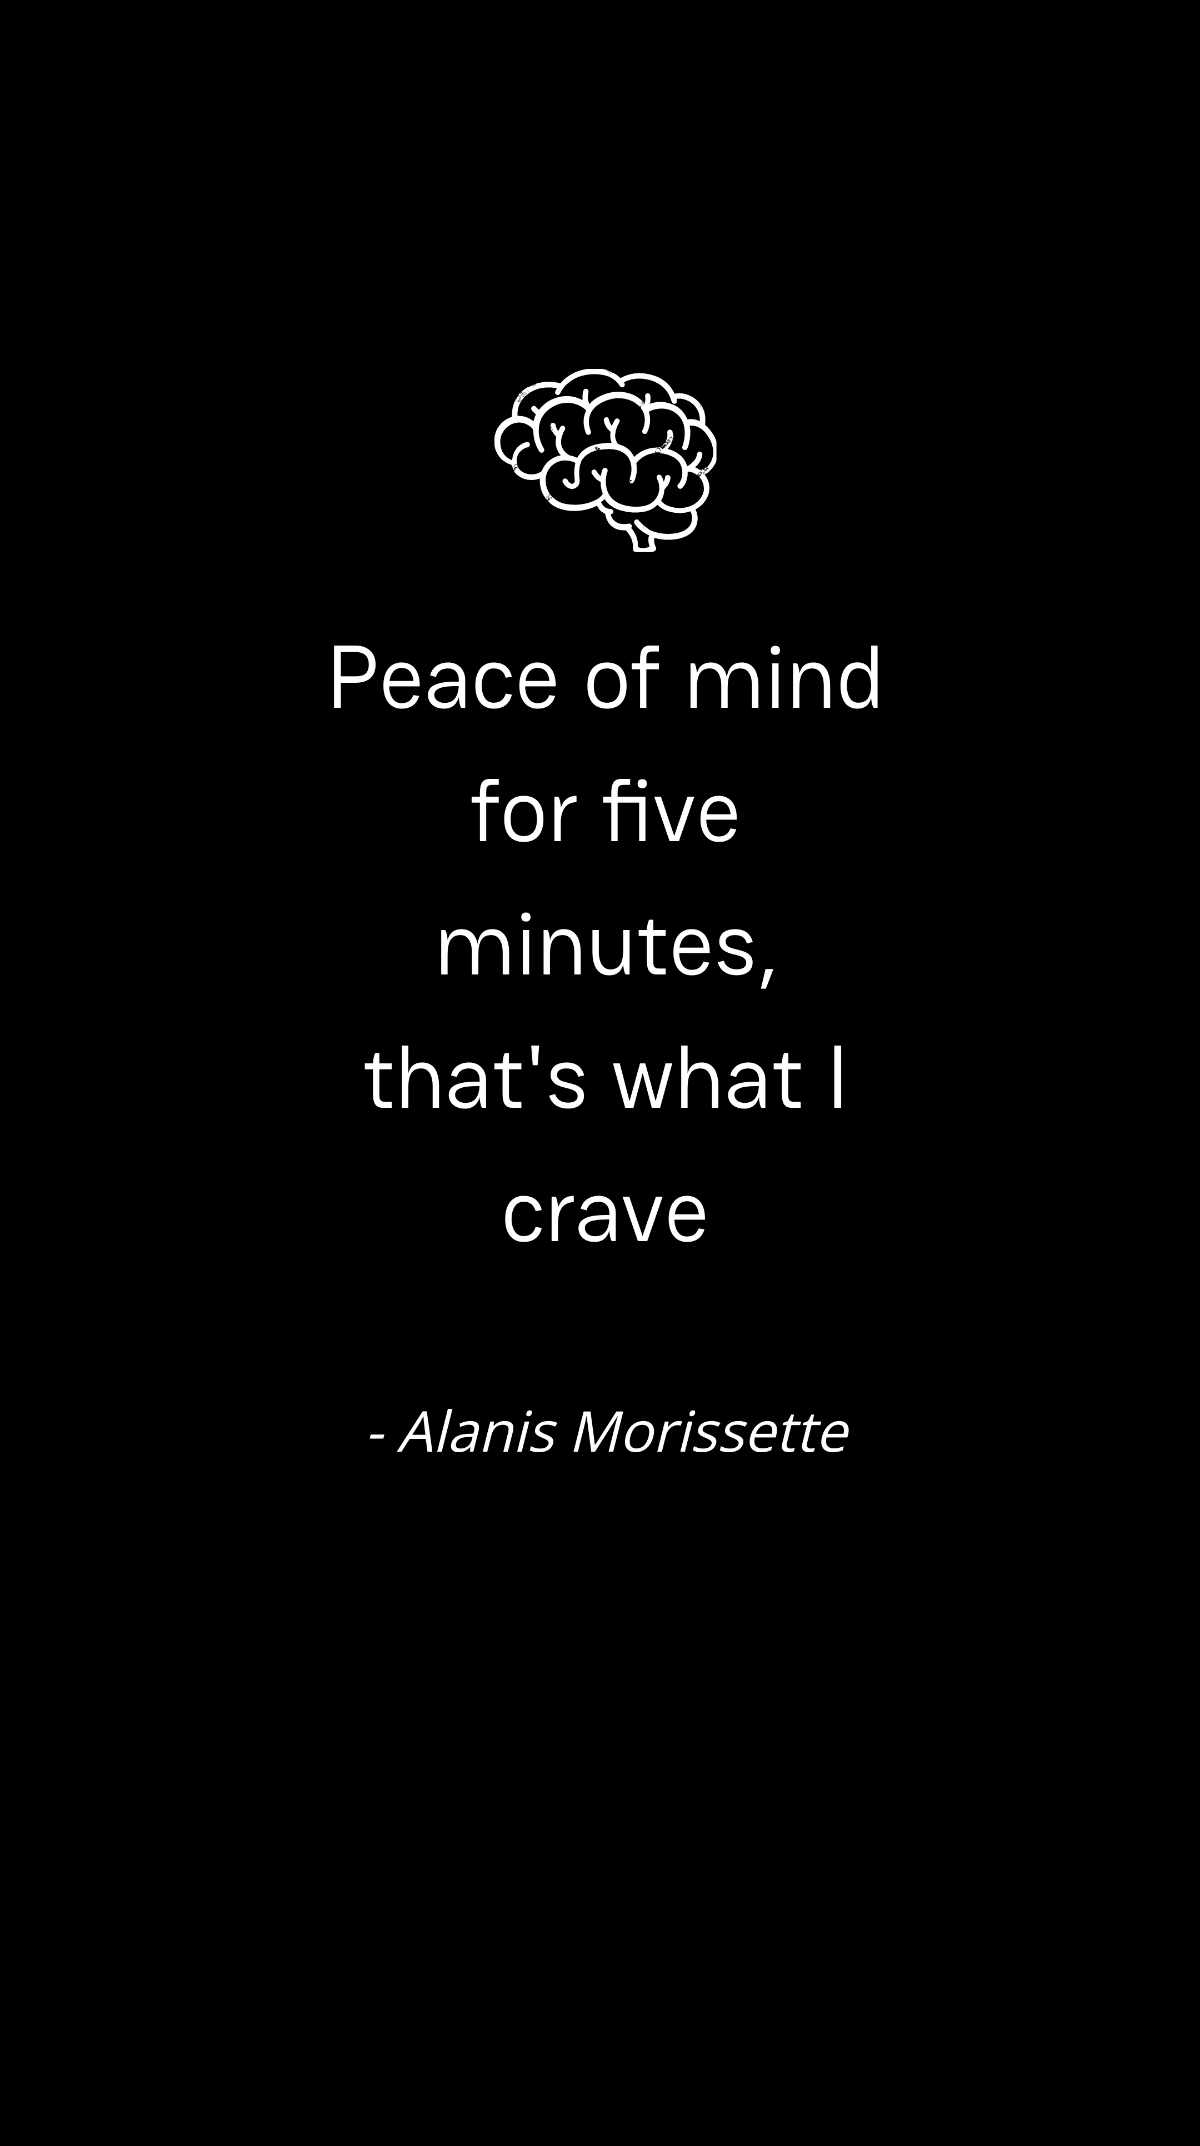 Alanis Morissette - Peace of mind for five minutes, that's what I crave